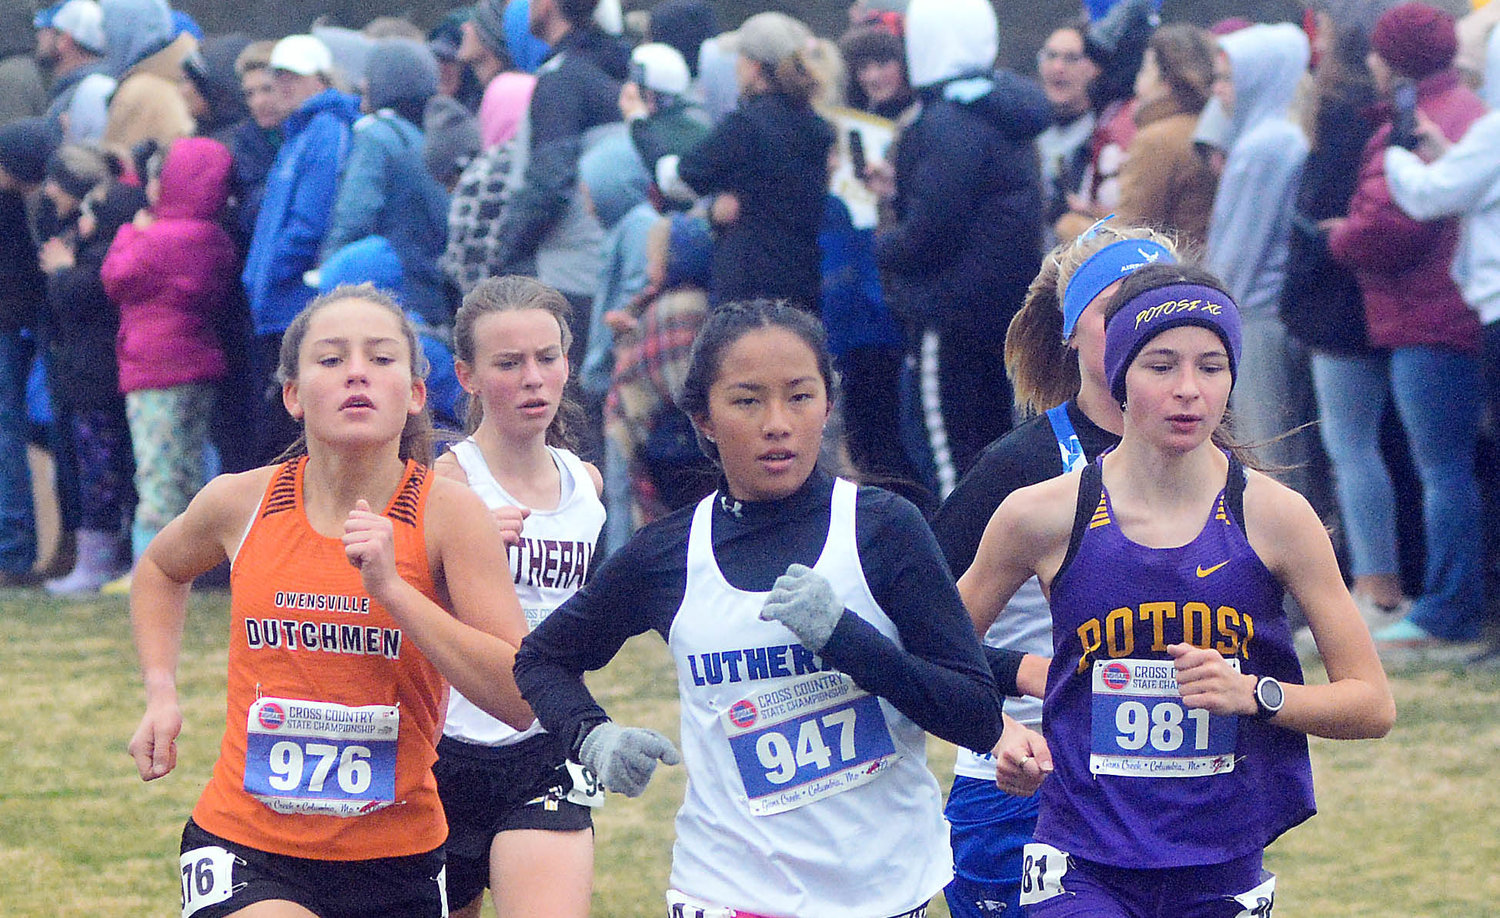 Ilene Limberg (left) races with a group of runners towards the front of the field during the Class 3 Girls Race at the Missouri State High School Activities Association (MSHSAA) Cross Country Championship Saturday in Columbia.